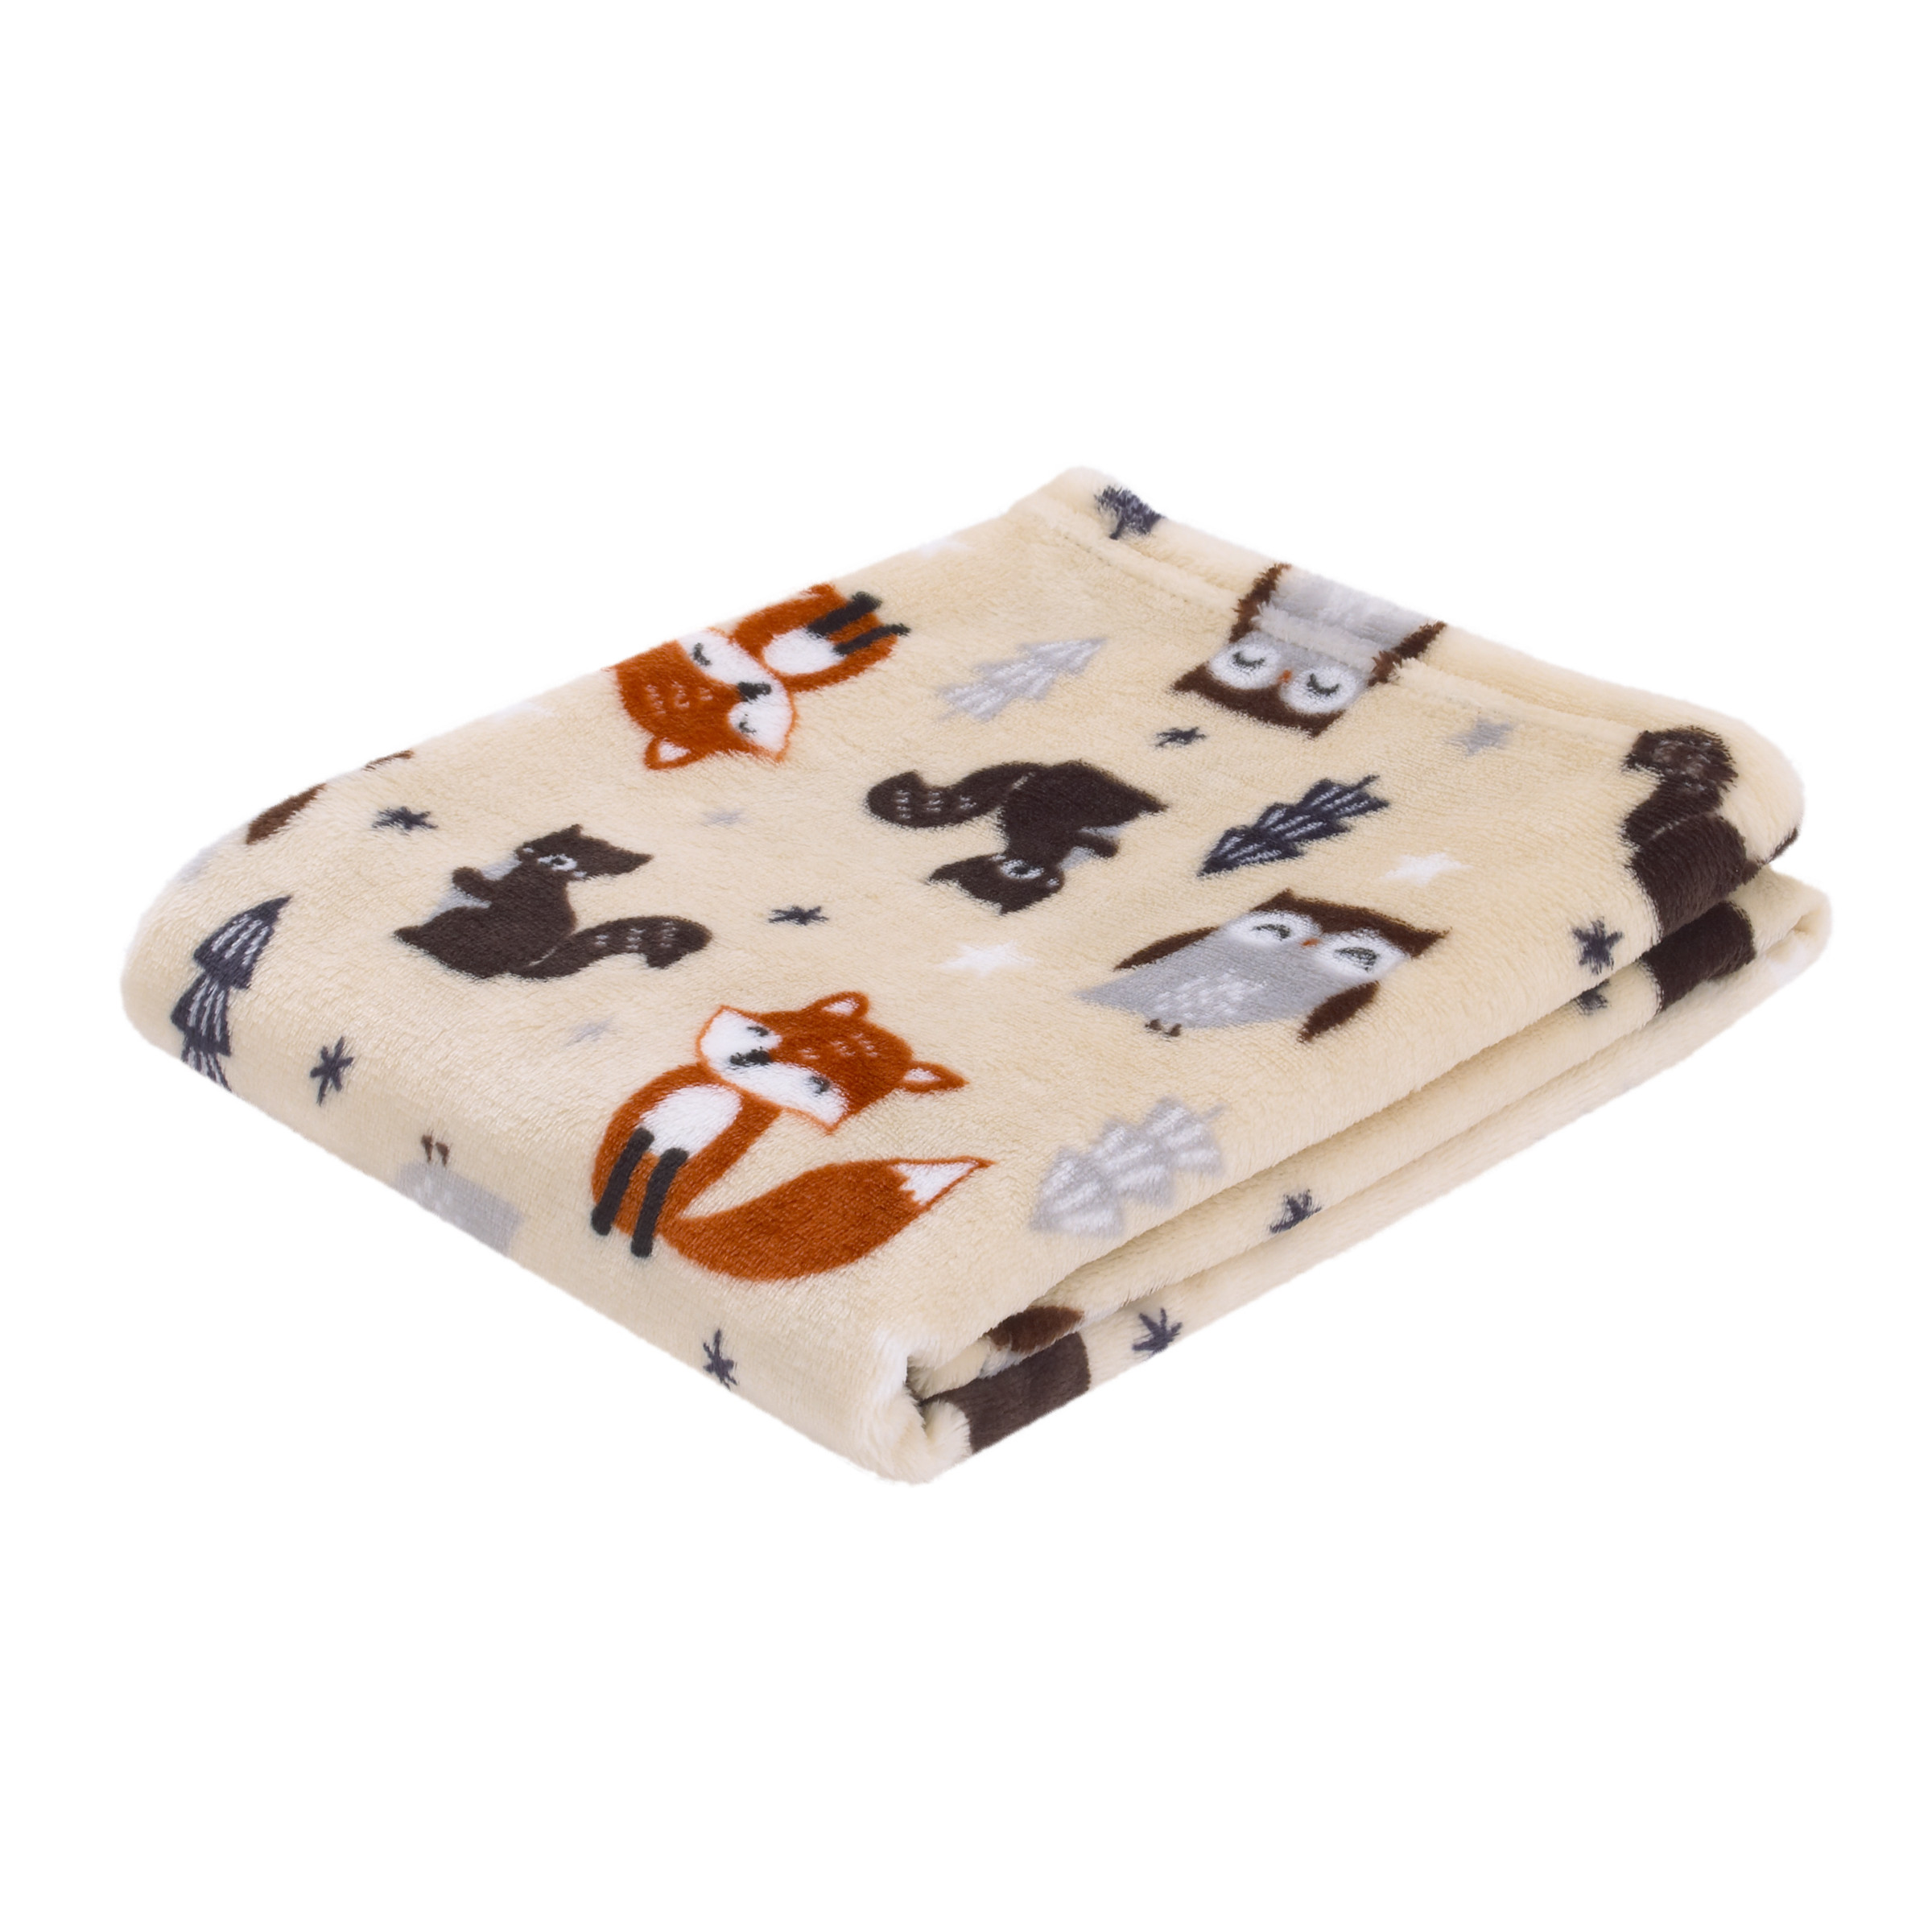 Parent's Choice Fox Woodland Baby Blanket, 30x36 inches - image 5 of 6